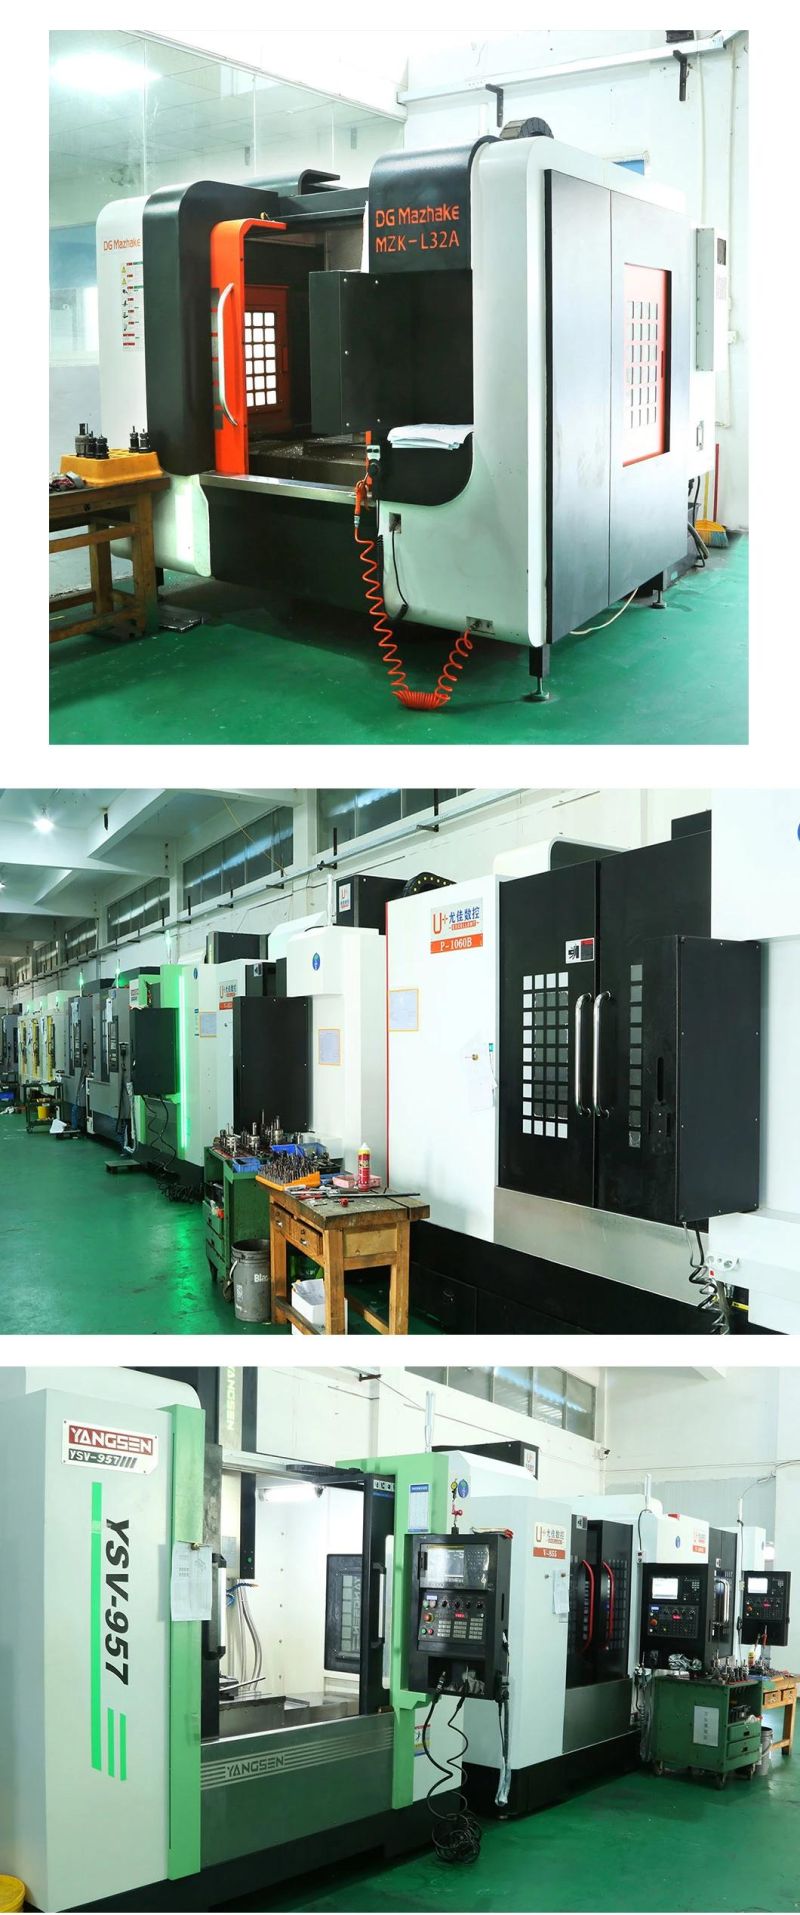 Customized Mould/Designing Industrial/Medical/Toy/Household/Electric/Consumer Electronic Plastic Injection Mould